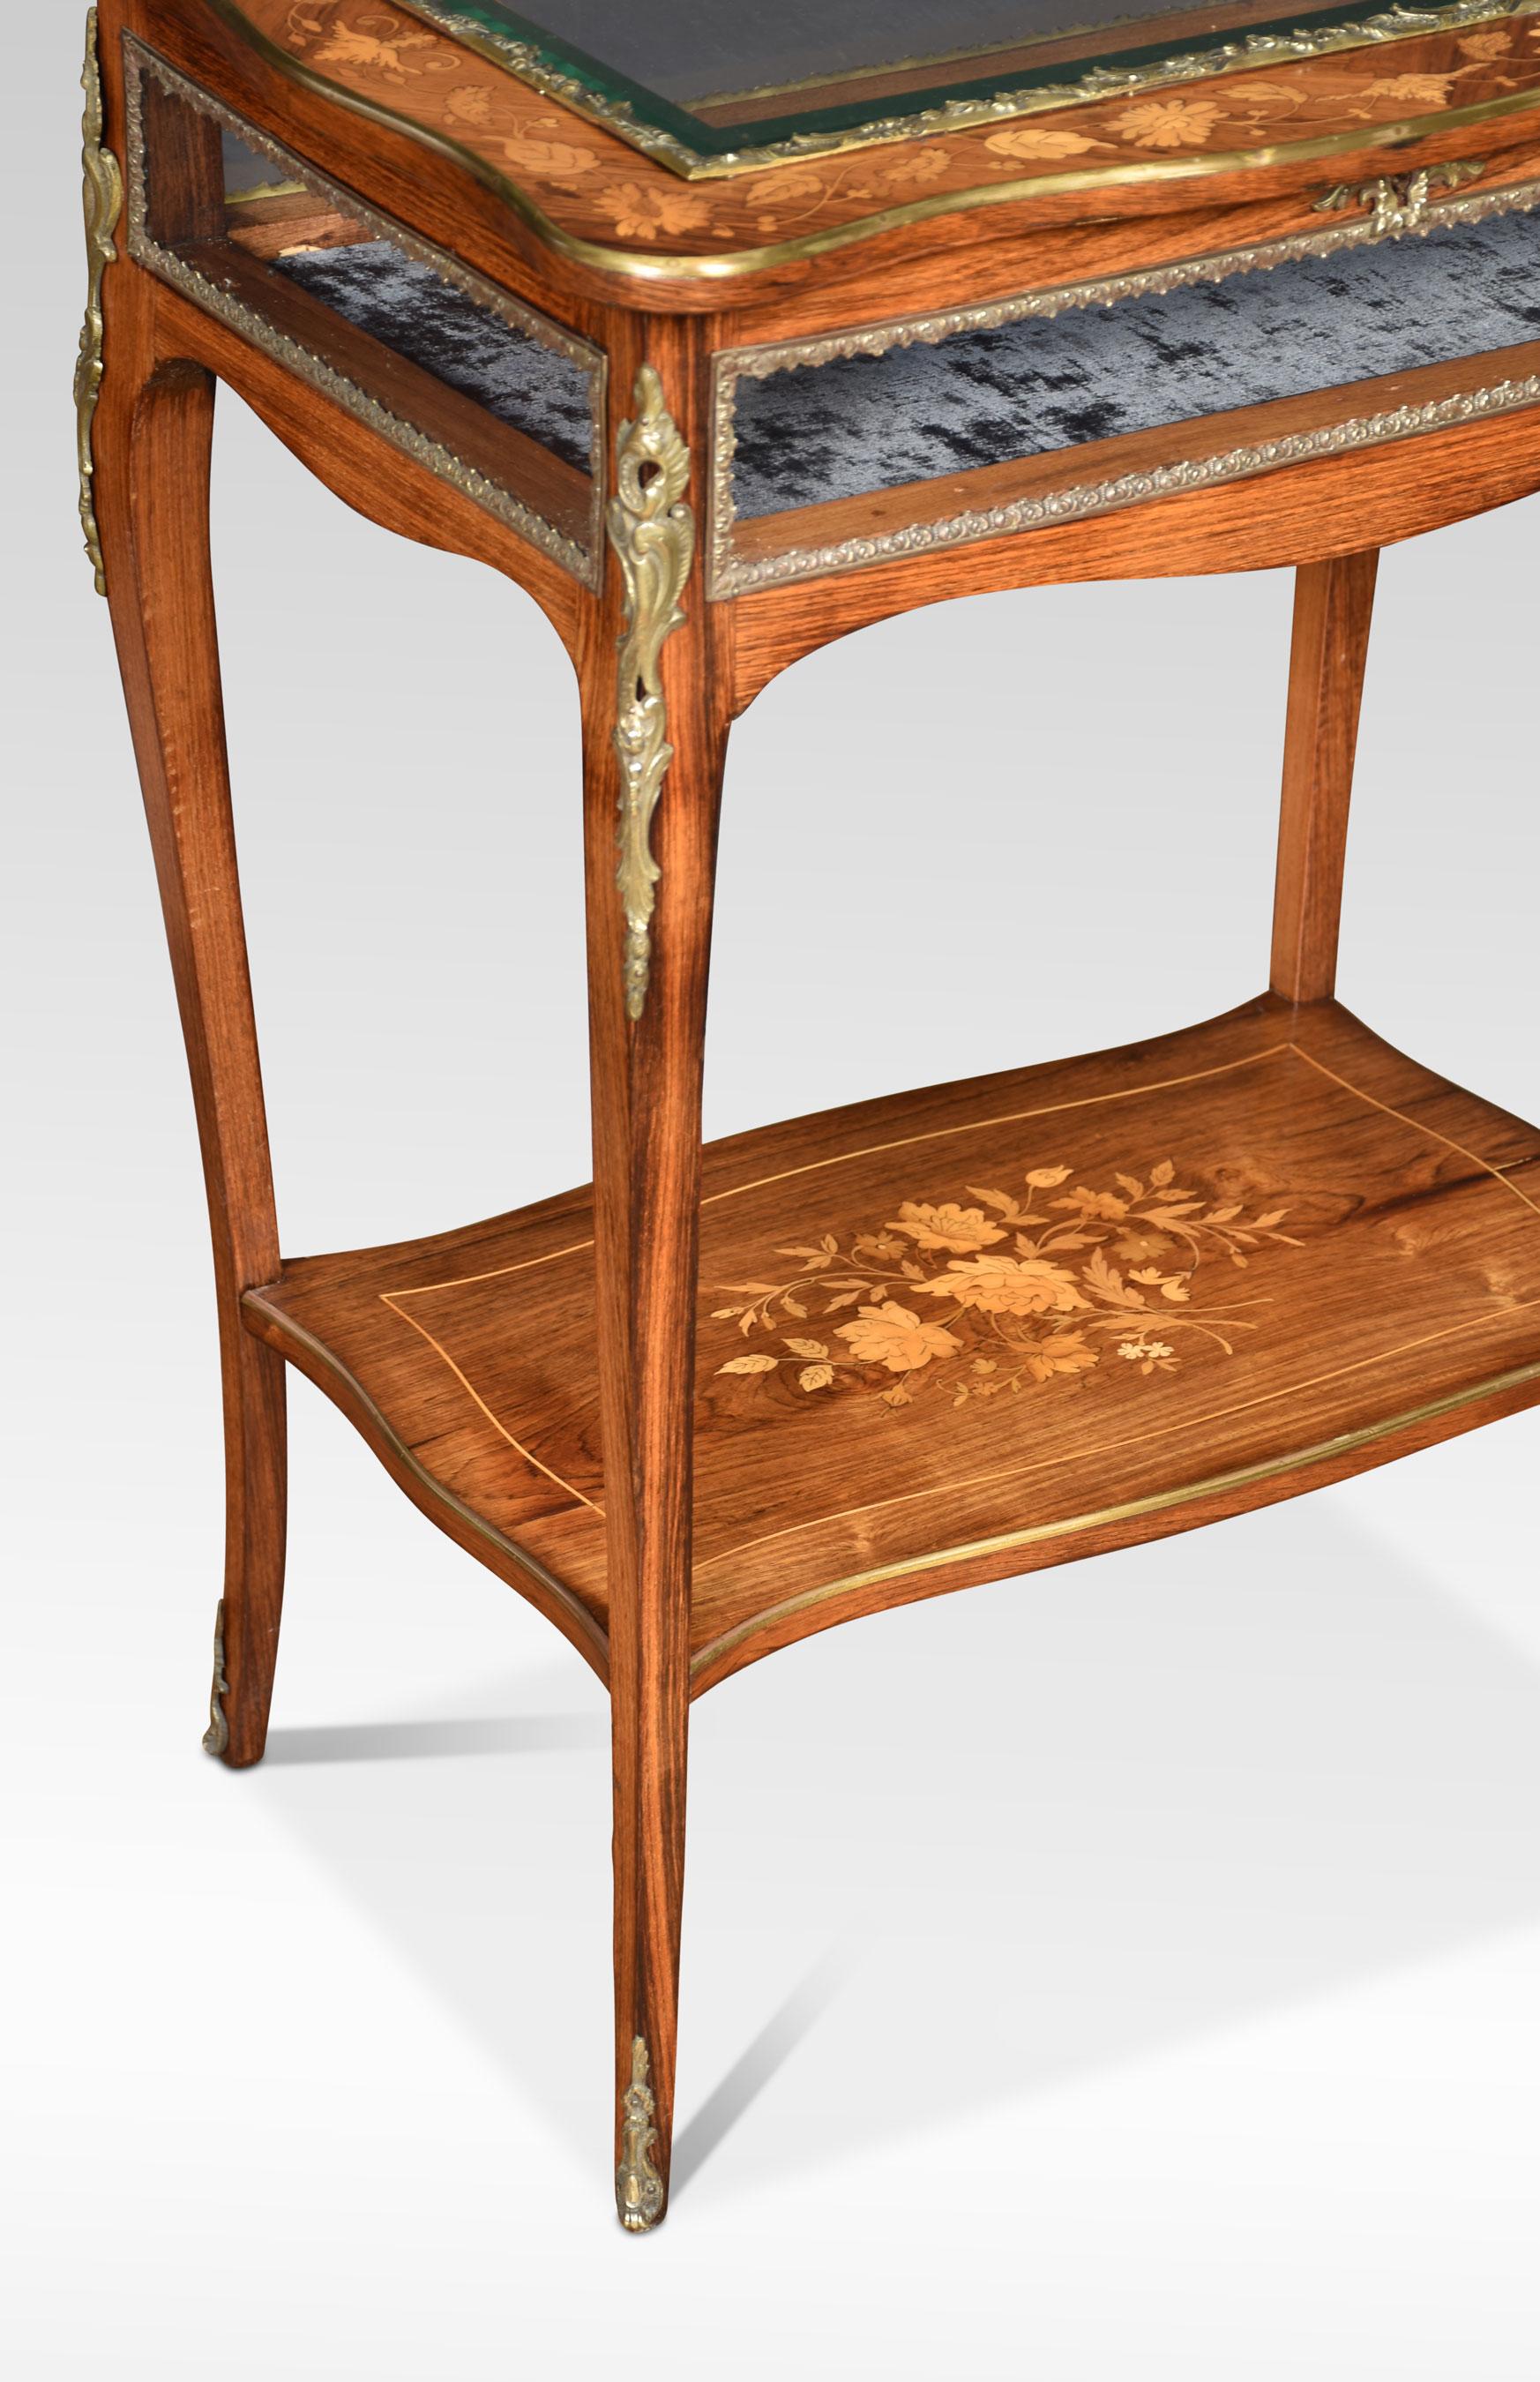 Walnut inlaid and metal mounted bijouterie tables, the top with beaded edge inset with a beveled glass panel and with beveled glass sides, enclosing a velvet-lined well. Over a shaped apron, on slender cabriole legs with brass mounts and sabots.